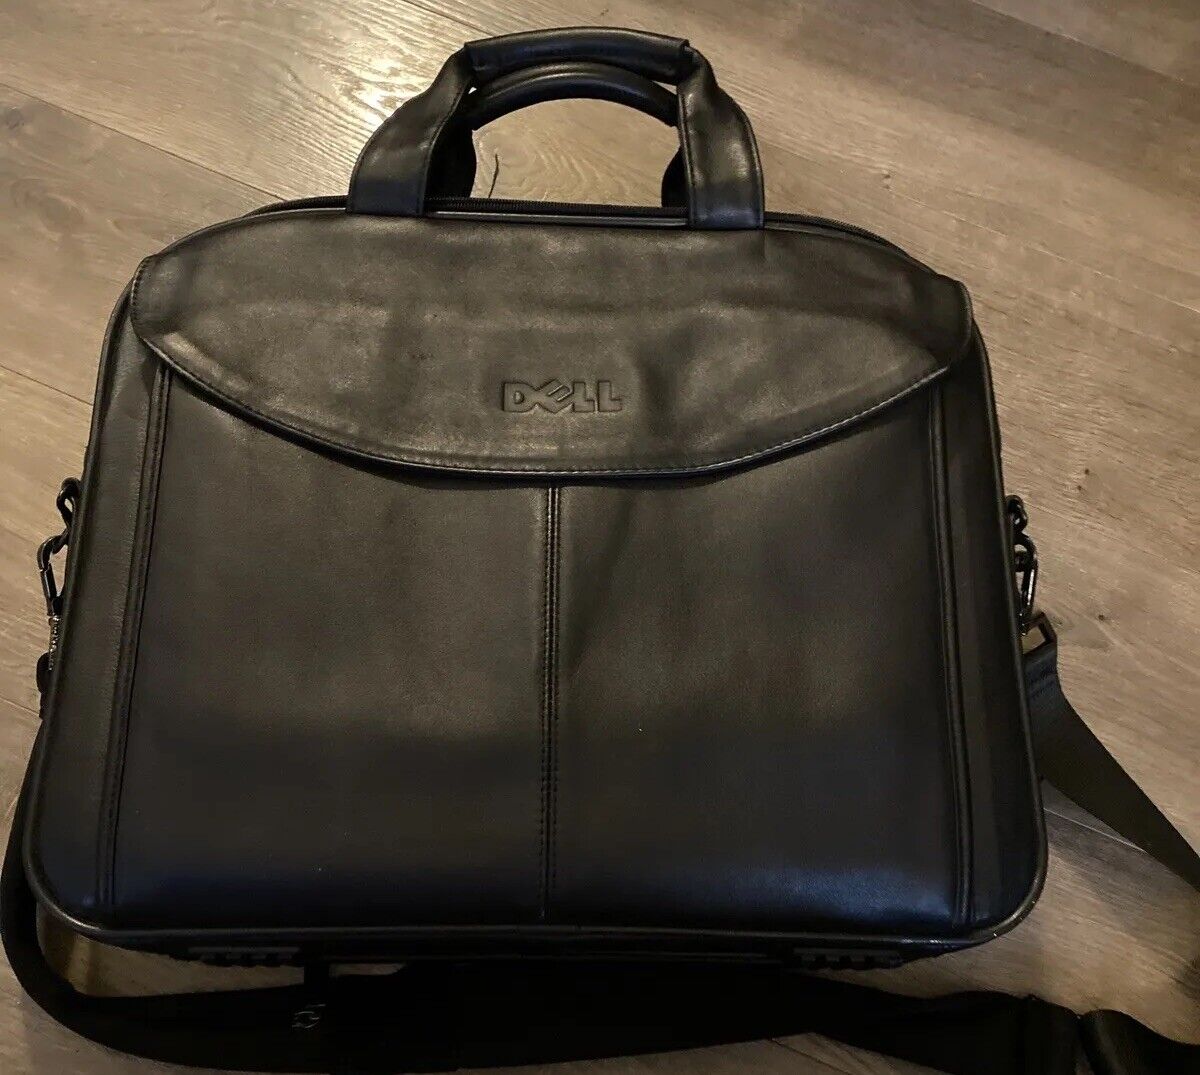 Dell Premium Professional Heavy Duty Briefcase Computer Bla Laptop Carrying Bag